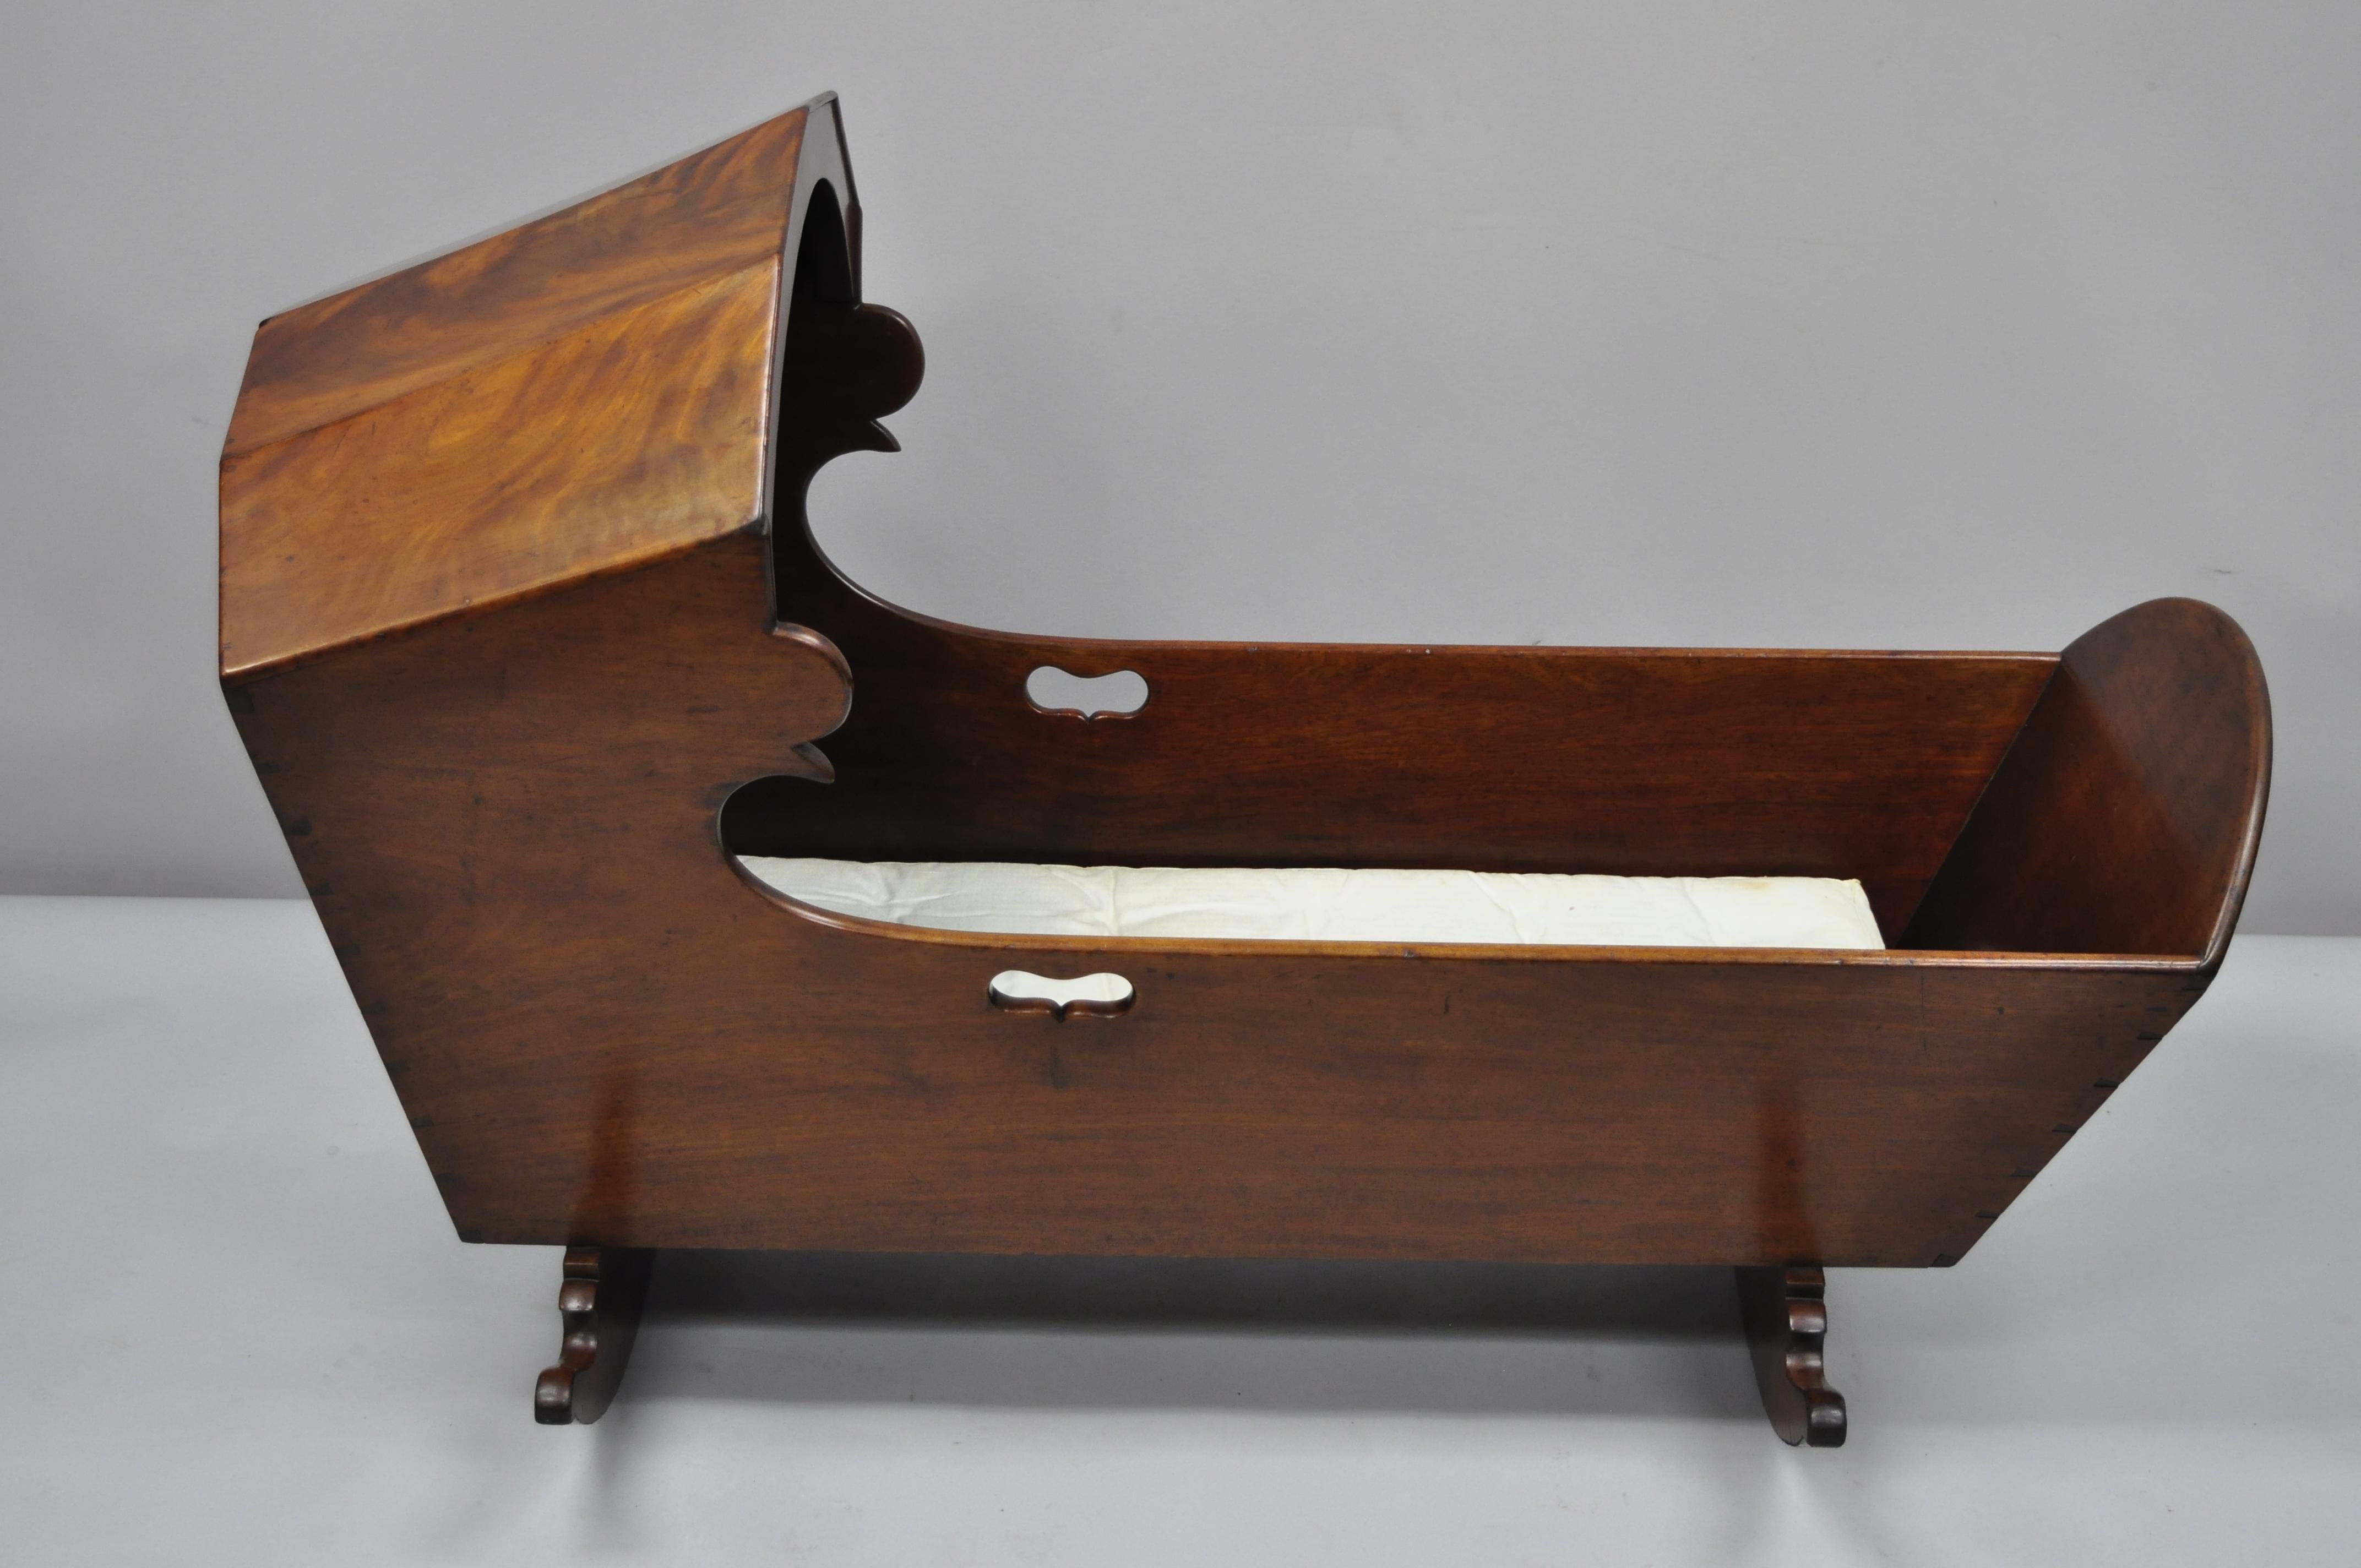 Antique crotch mahogany Victorian dovetailed baby bed cradle. Item features hand dovetailed construction, beautiful crotch mahogany woodgrain, very nice antique item, quality American craftsmanship, circa late 19th century. Measurements: 31